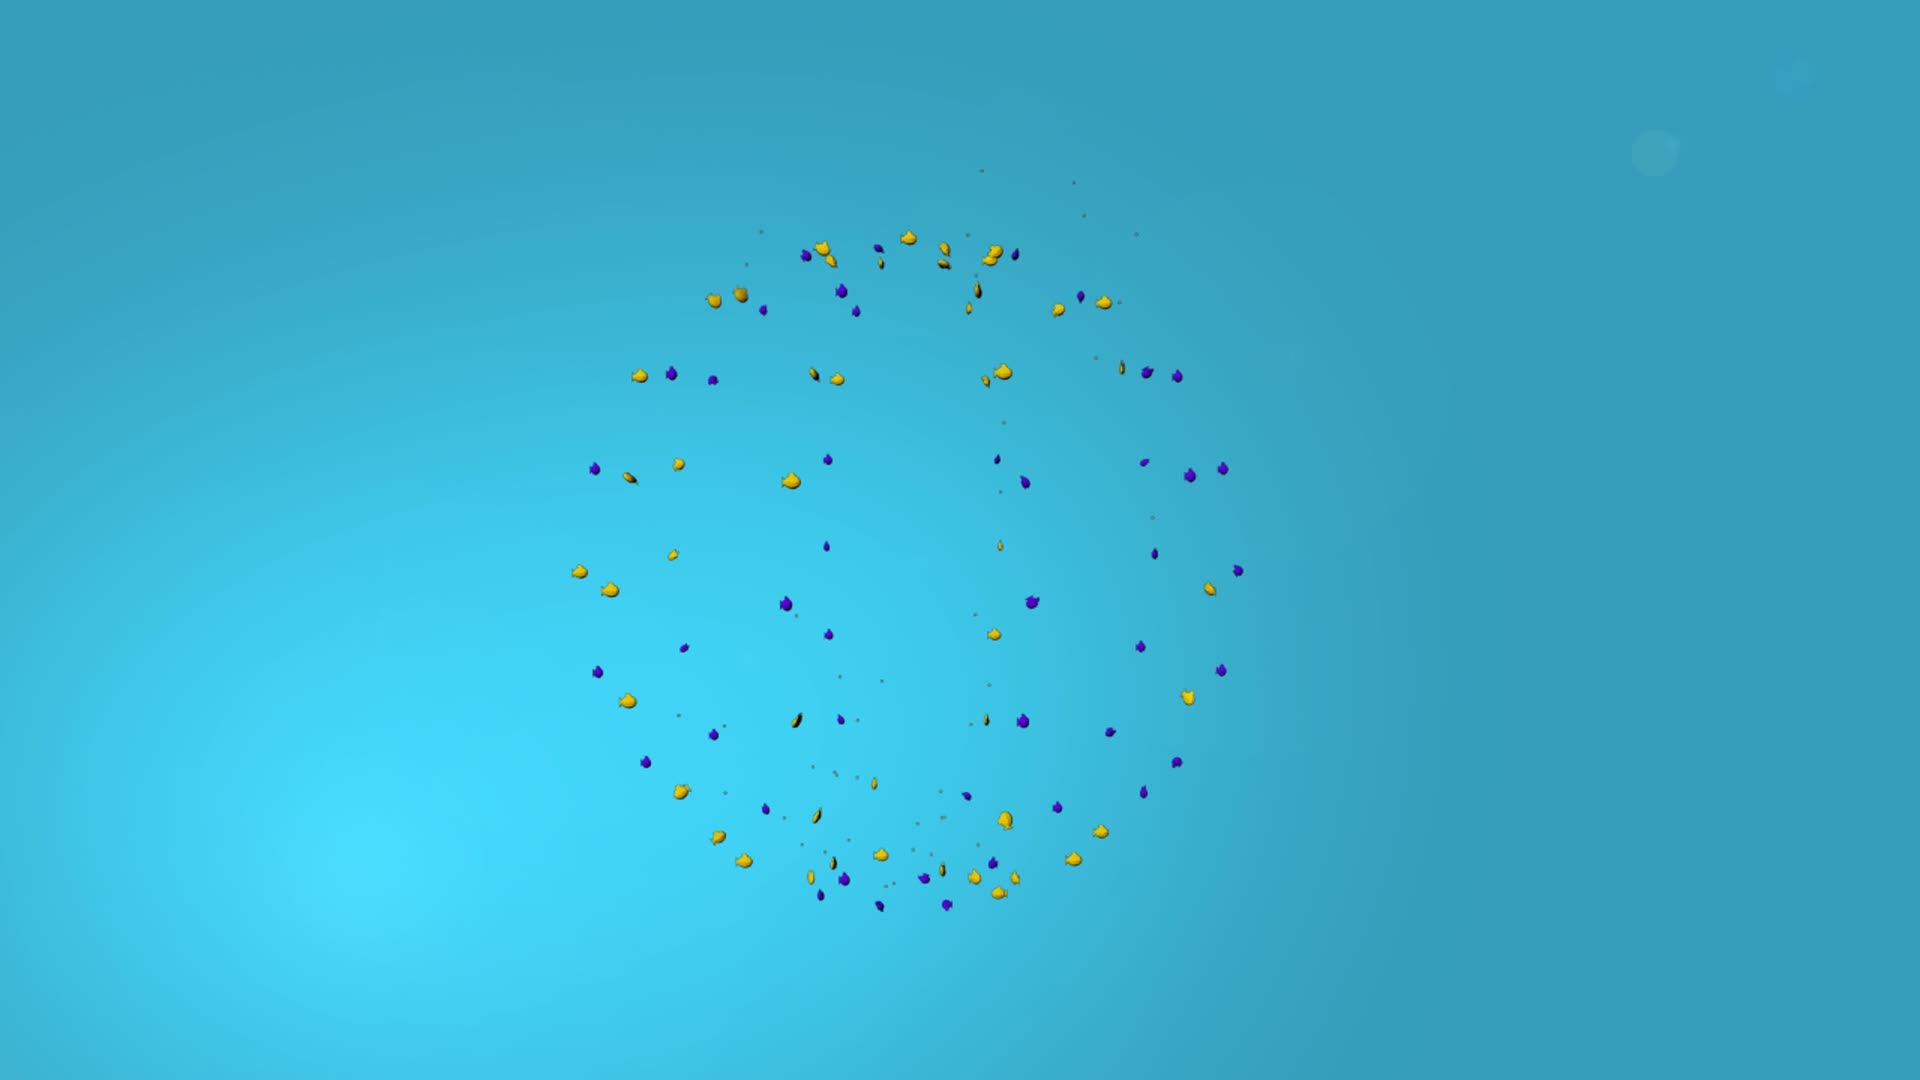 Particle Animation 02